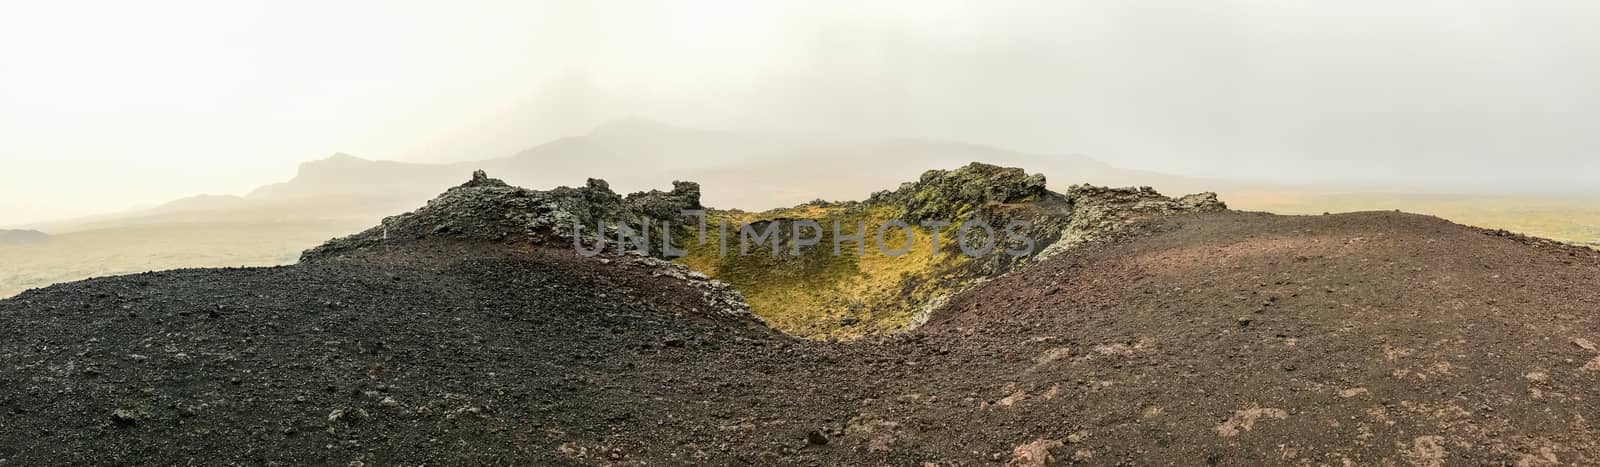 Snaefellsness national park in Iceland panorama from top of volcano during foggy day black and red rocks